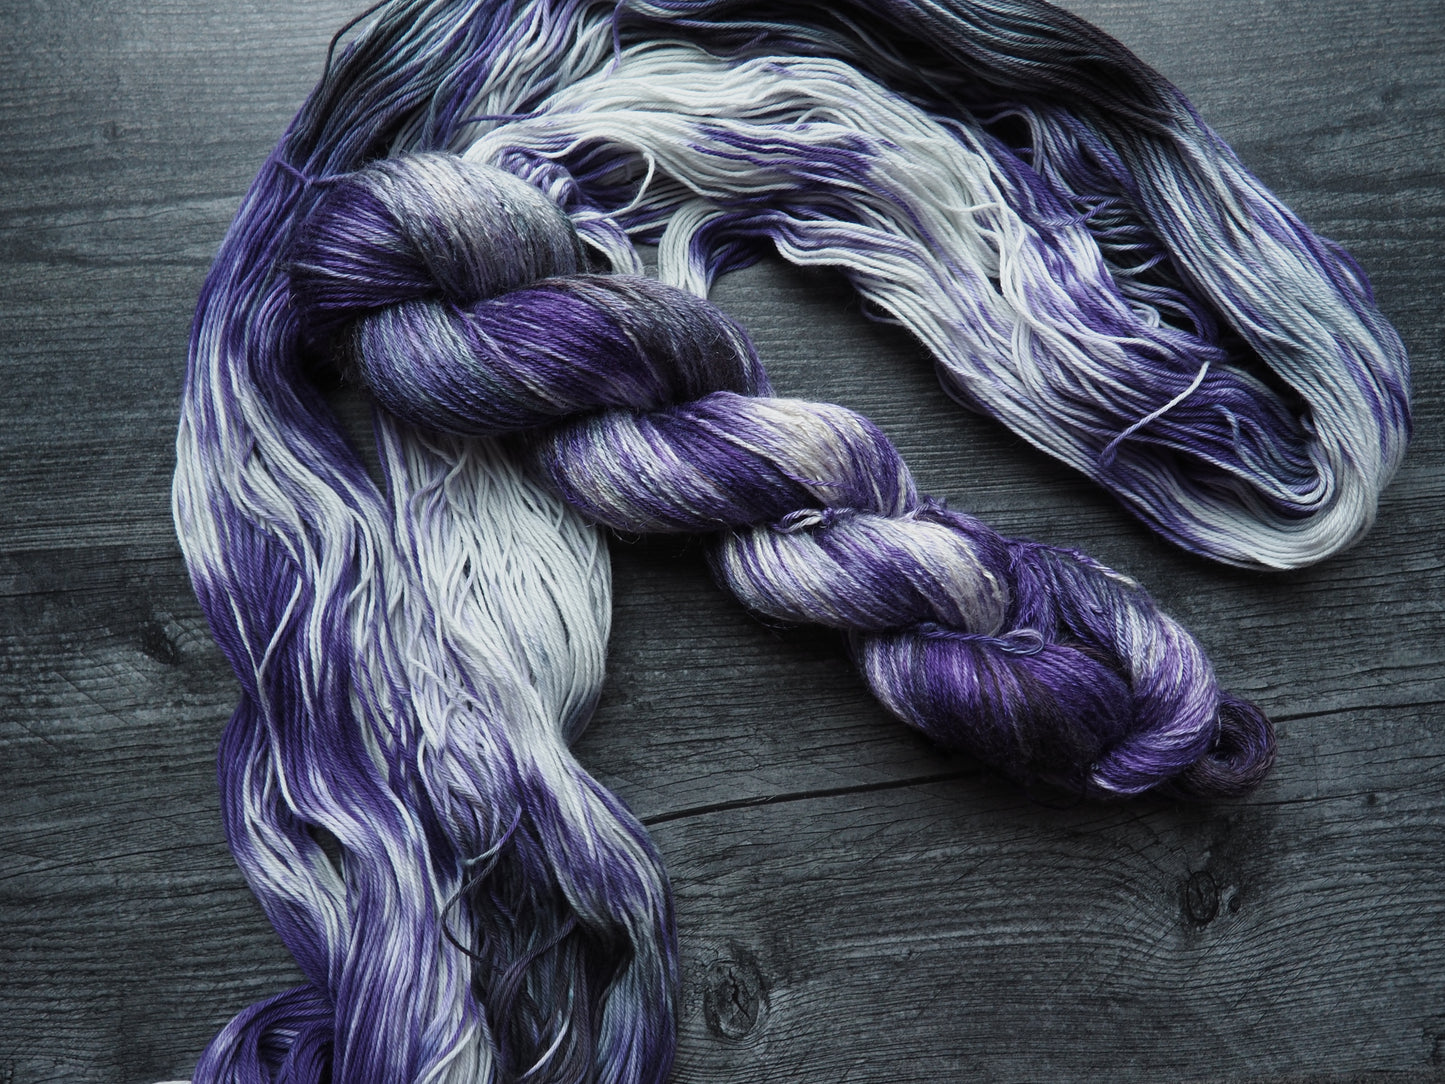 Aces - Dyed to Order *Please allow 3-4 weeks for dyeing*